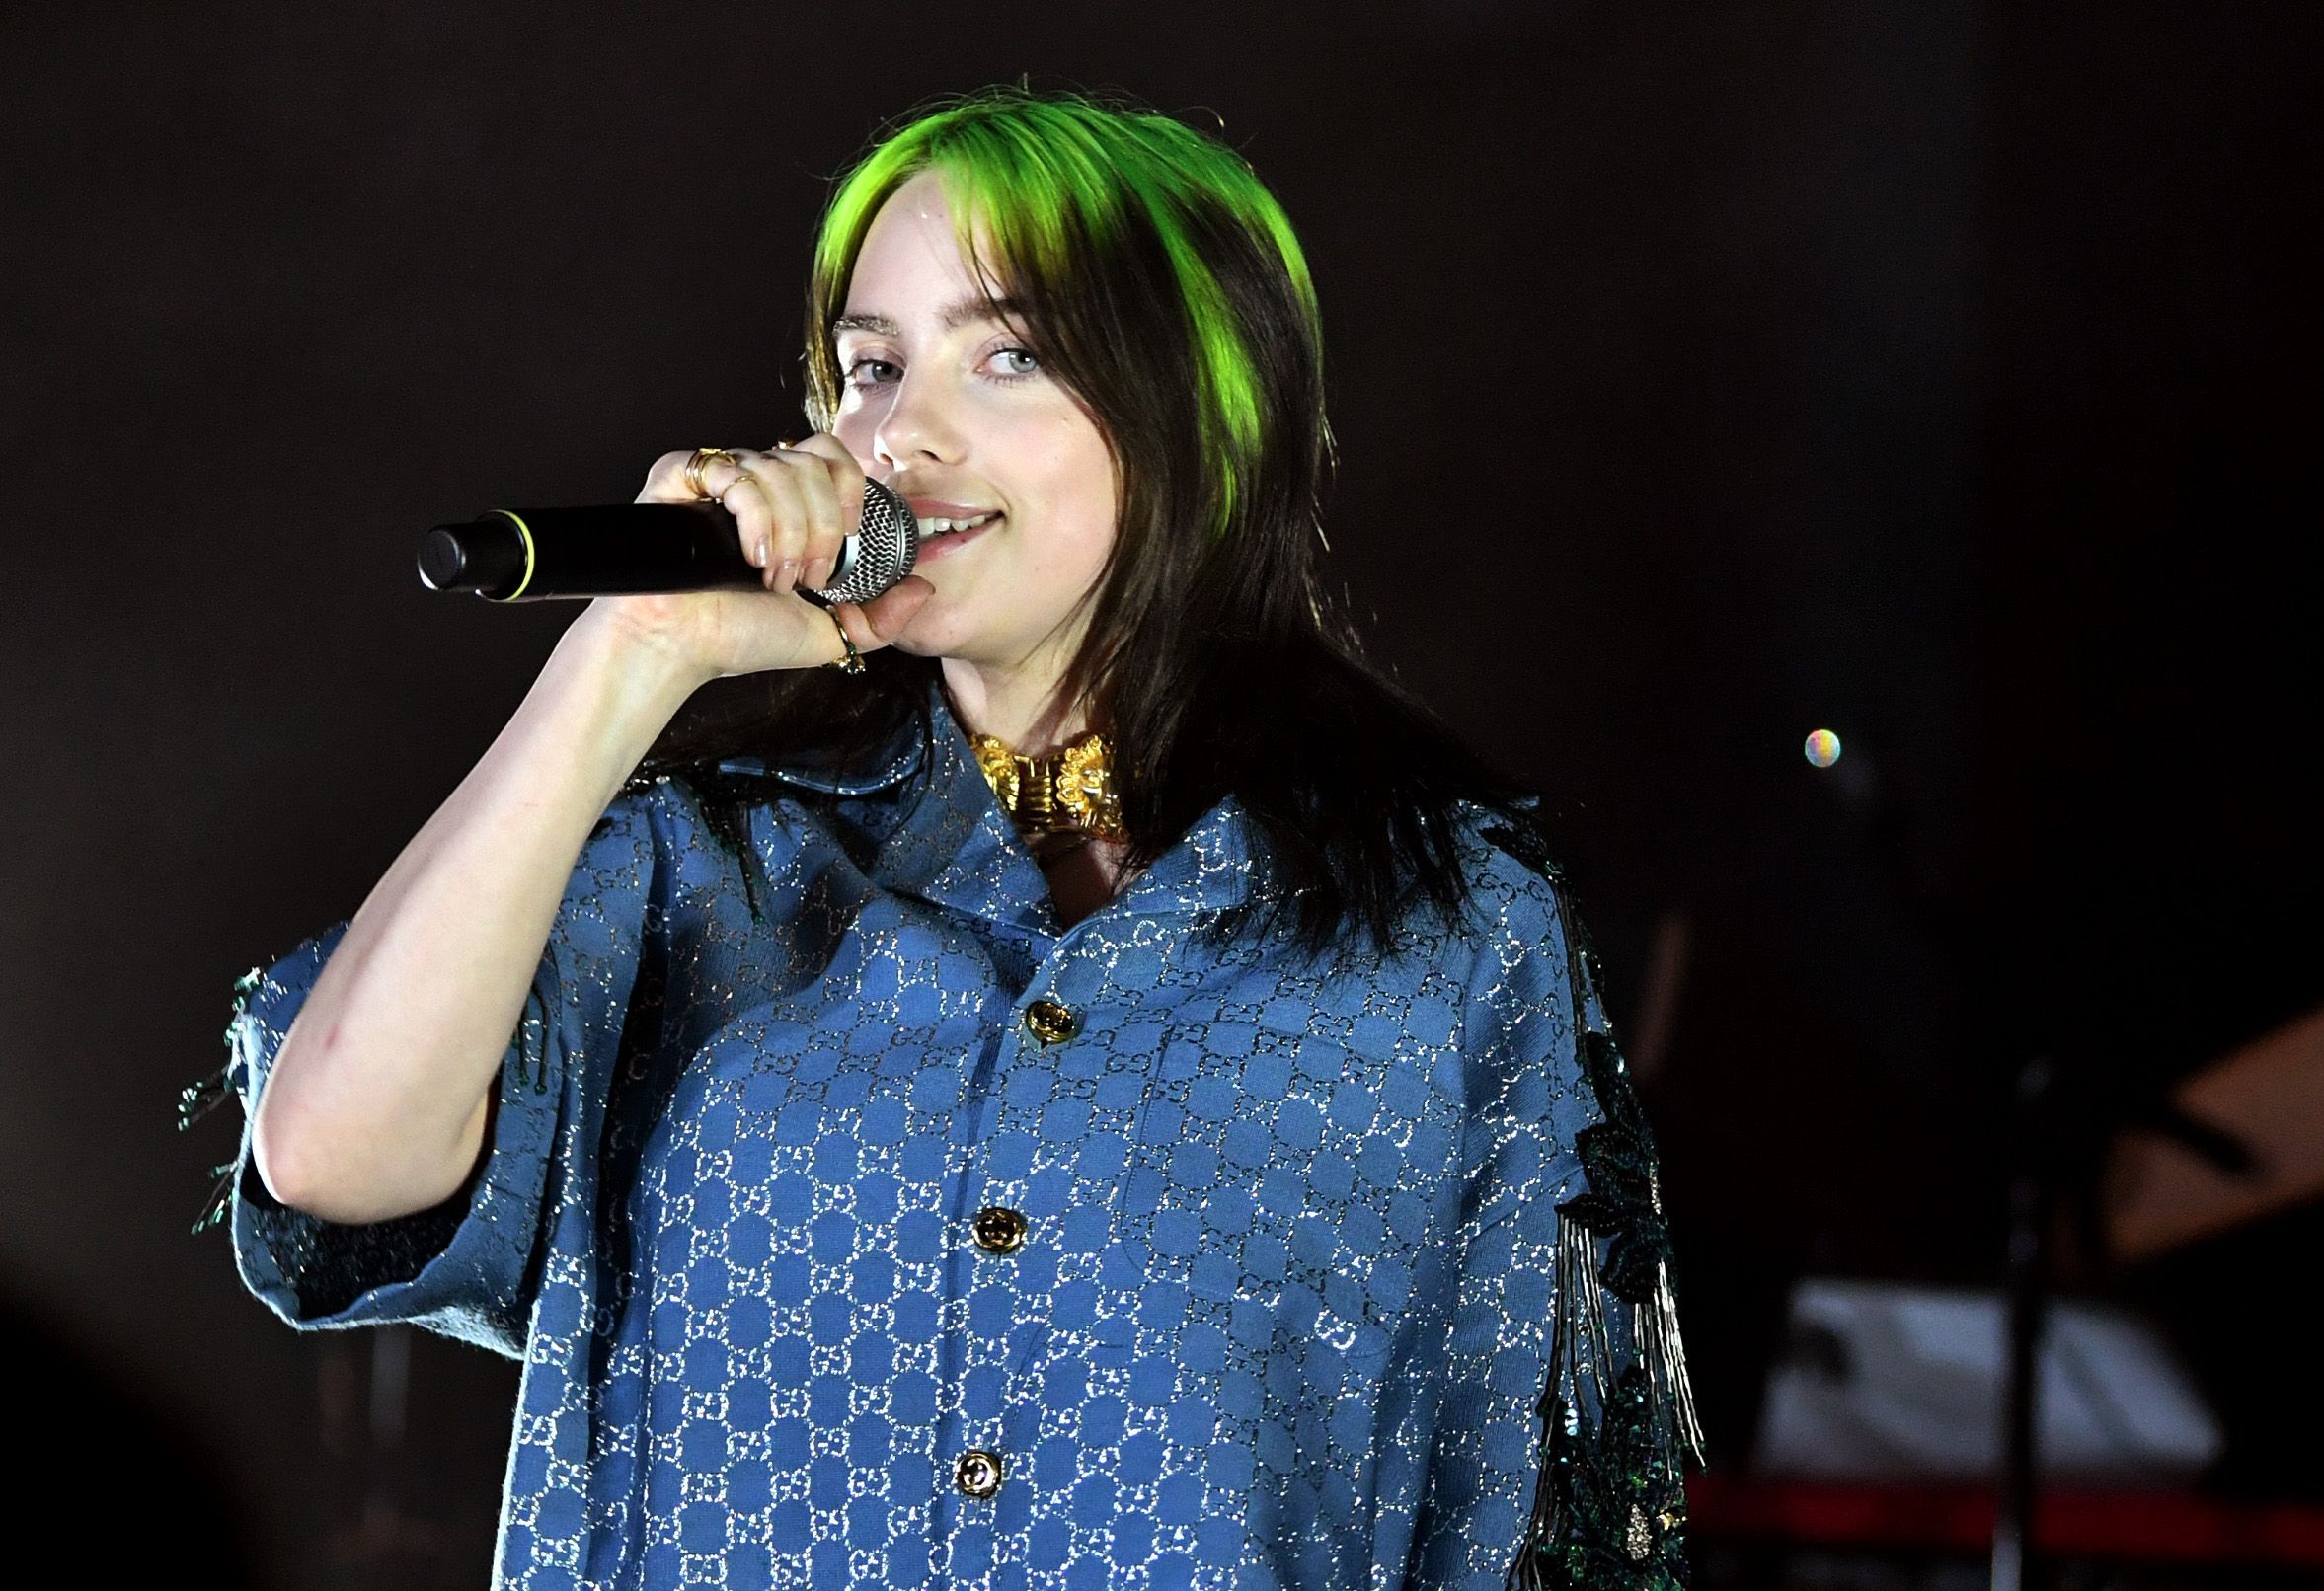 Billie Eilish, wearing Gucci, speaks on stage at the 2019 LACMA Art + Film Gala Presented By Gucci